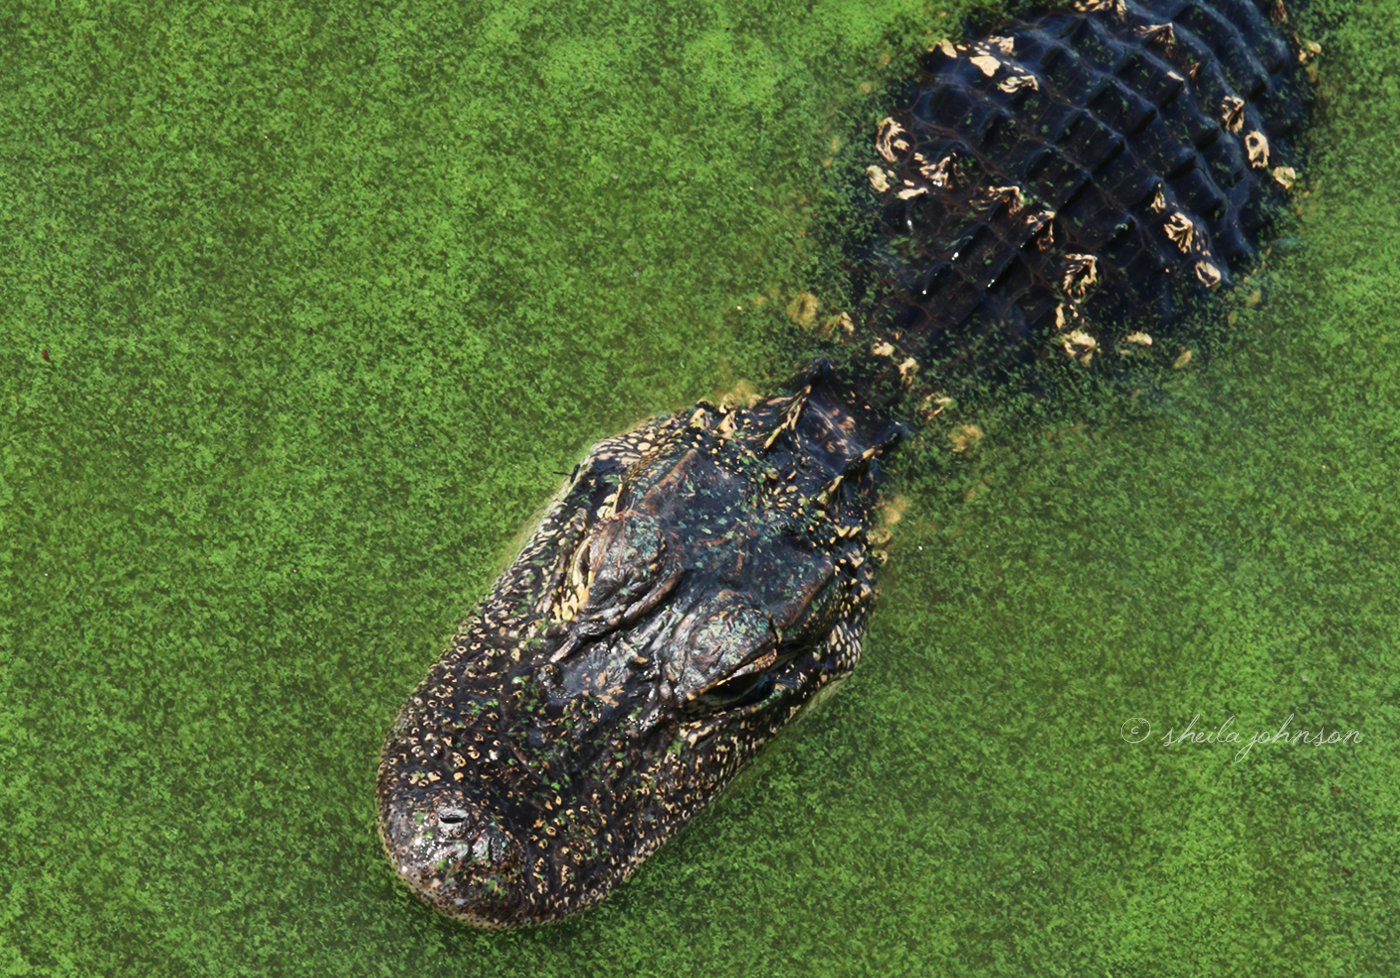 We Went To Shoot Algae For This Post And Stumbled Upon This Alligator In A Place Where We Honestly Didn't Expect To See One. Changes In Nature Cause Changes In Wildlife Behavior, And You Are As Likely As We To See Dangerous Wildlife In The Most Unexpected Places.